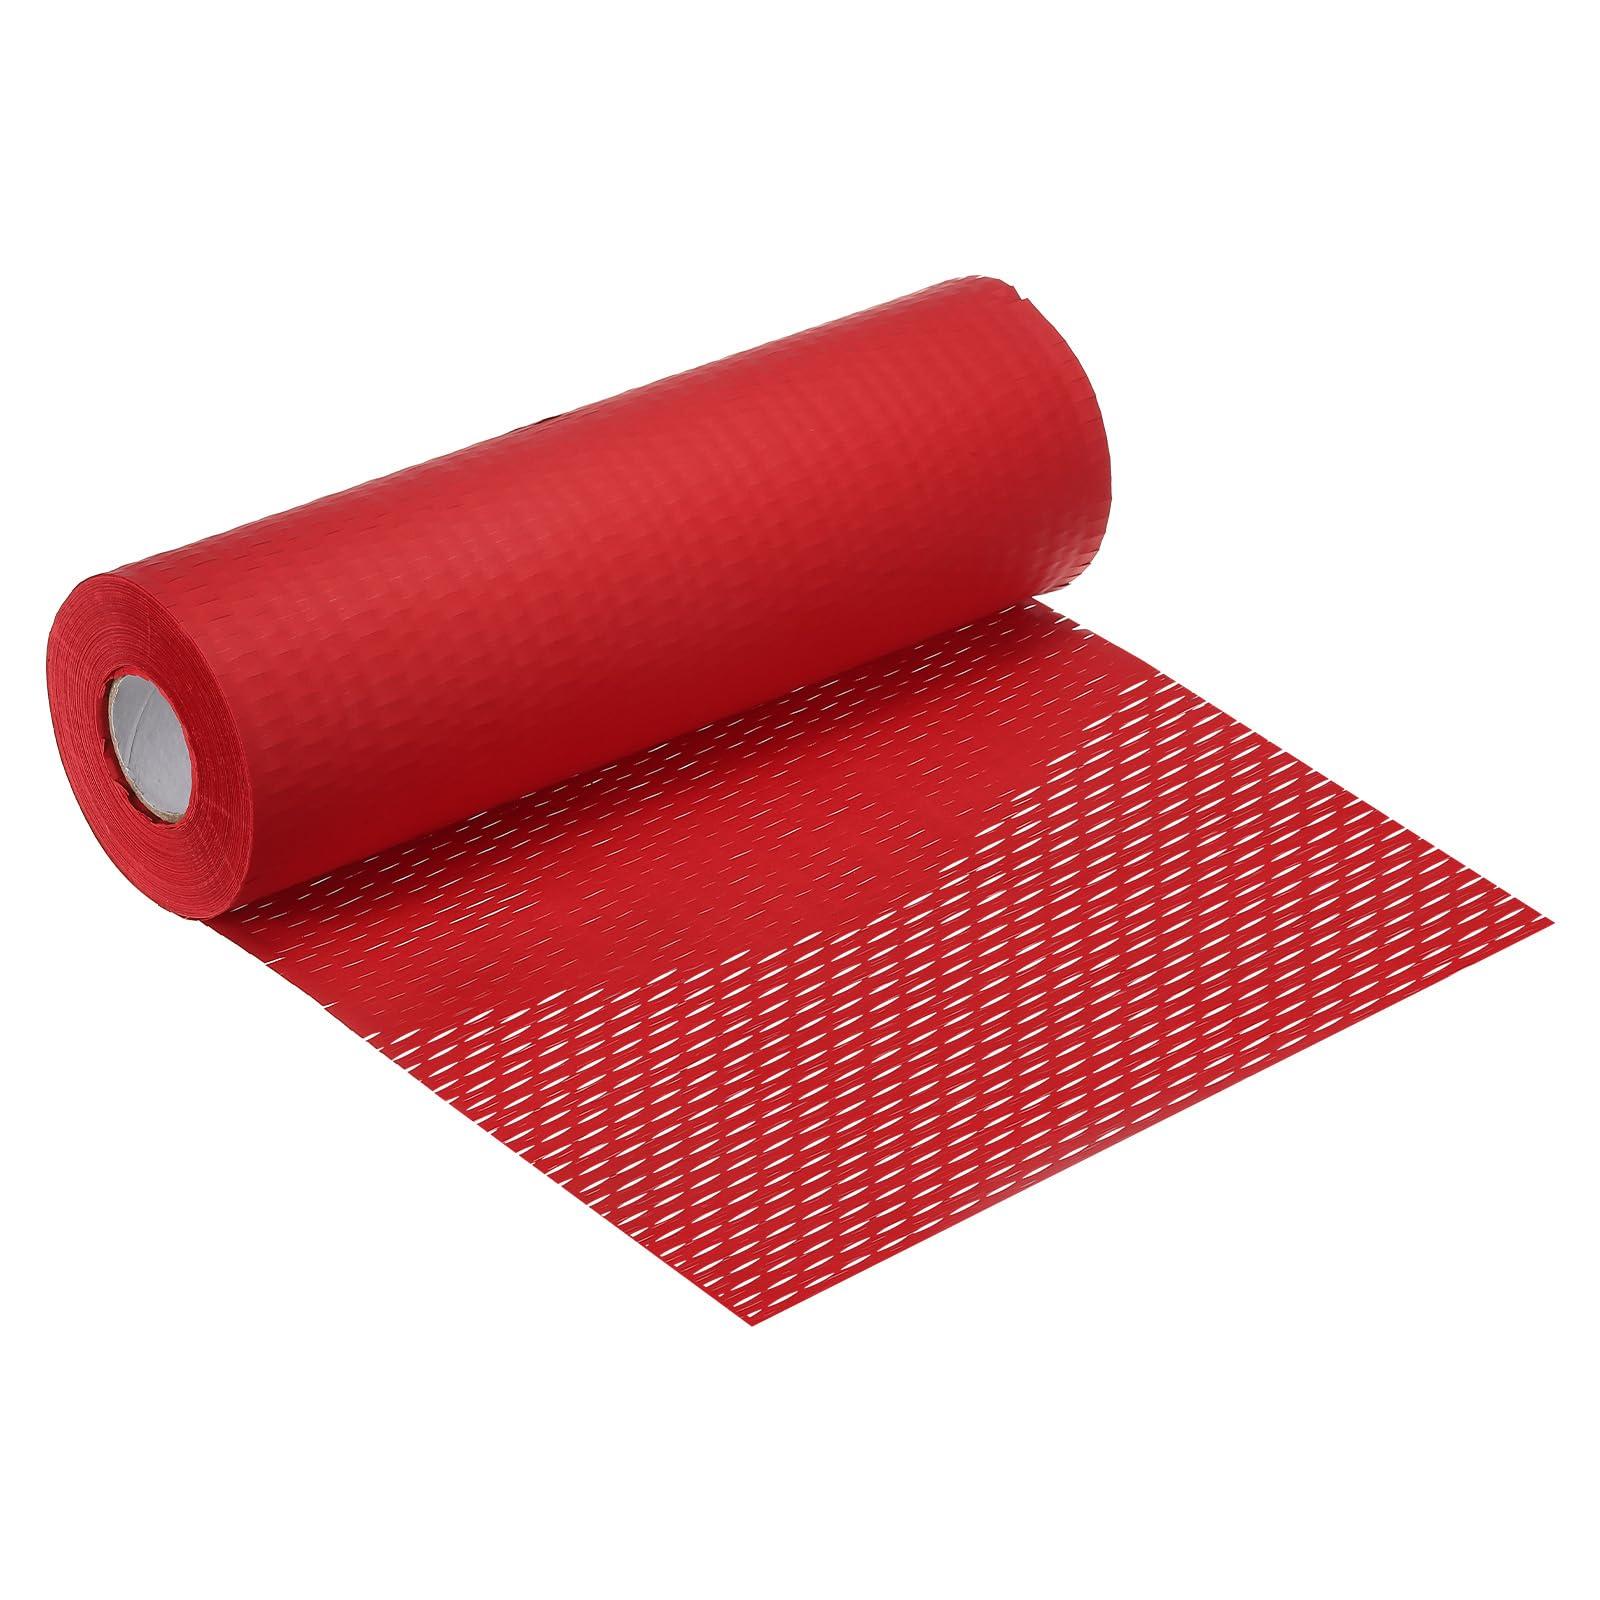 sourcing map Honeycomb Packing Paper 11.5 Inch x 164 Feet Cushioning Wrap Rolls Packing Paper for Moving Shipping Packaging Gifts Red